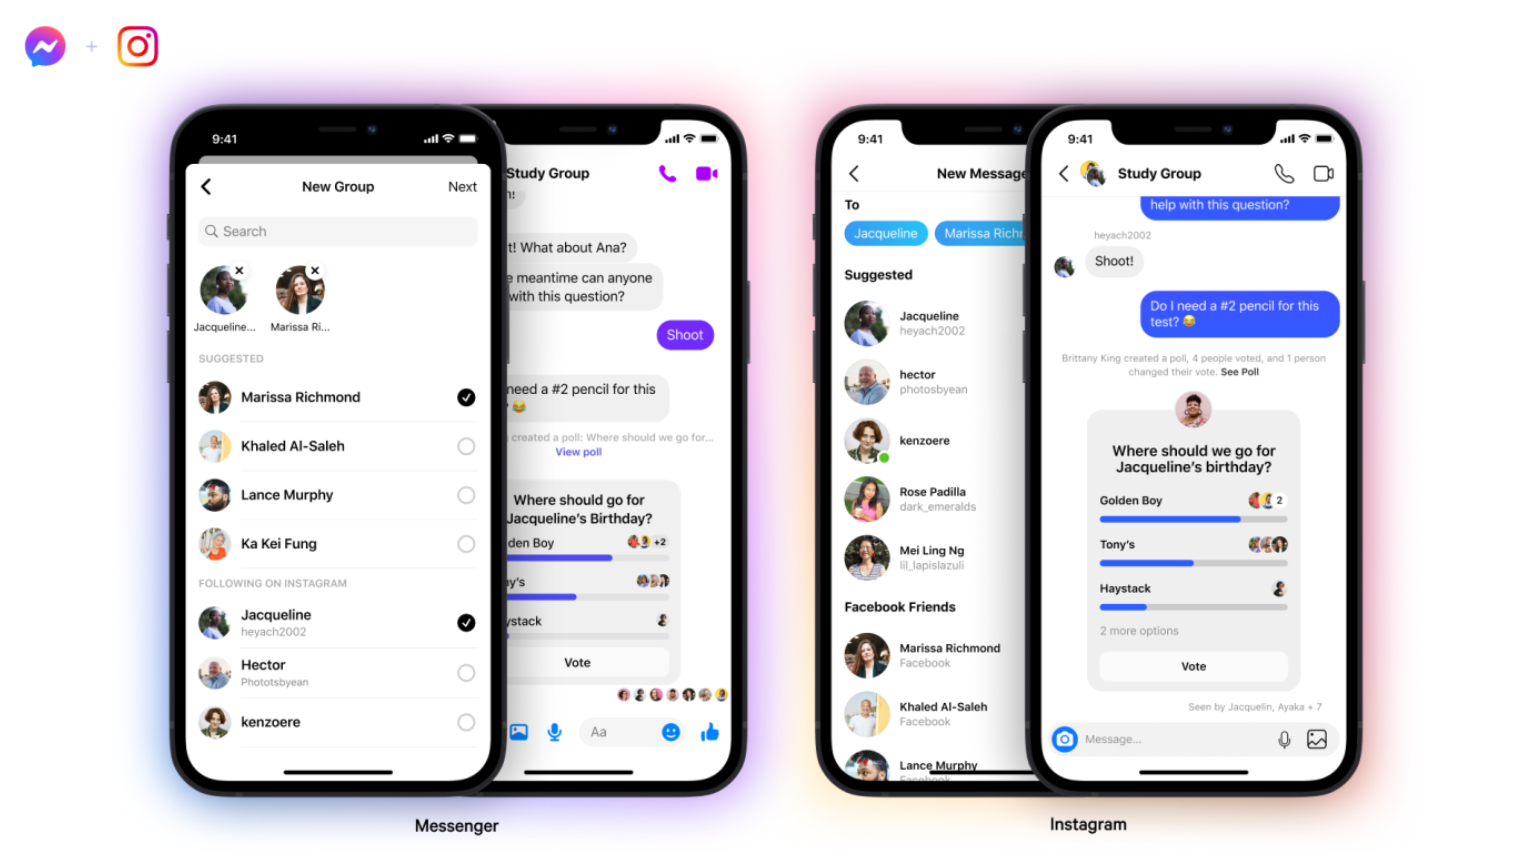 Messenger and Instagram are now BFFs - Facebook Messenger and Instagram now support cross-app group chats